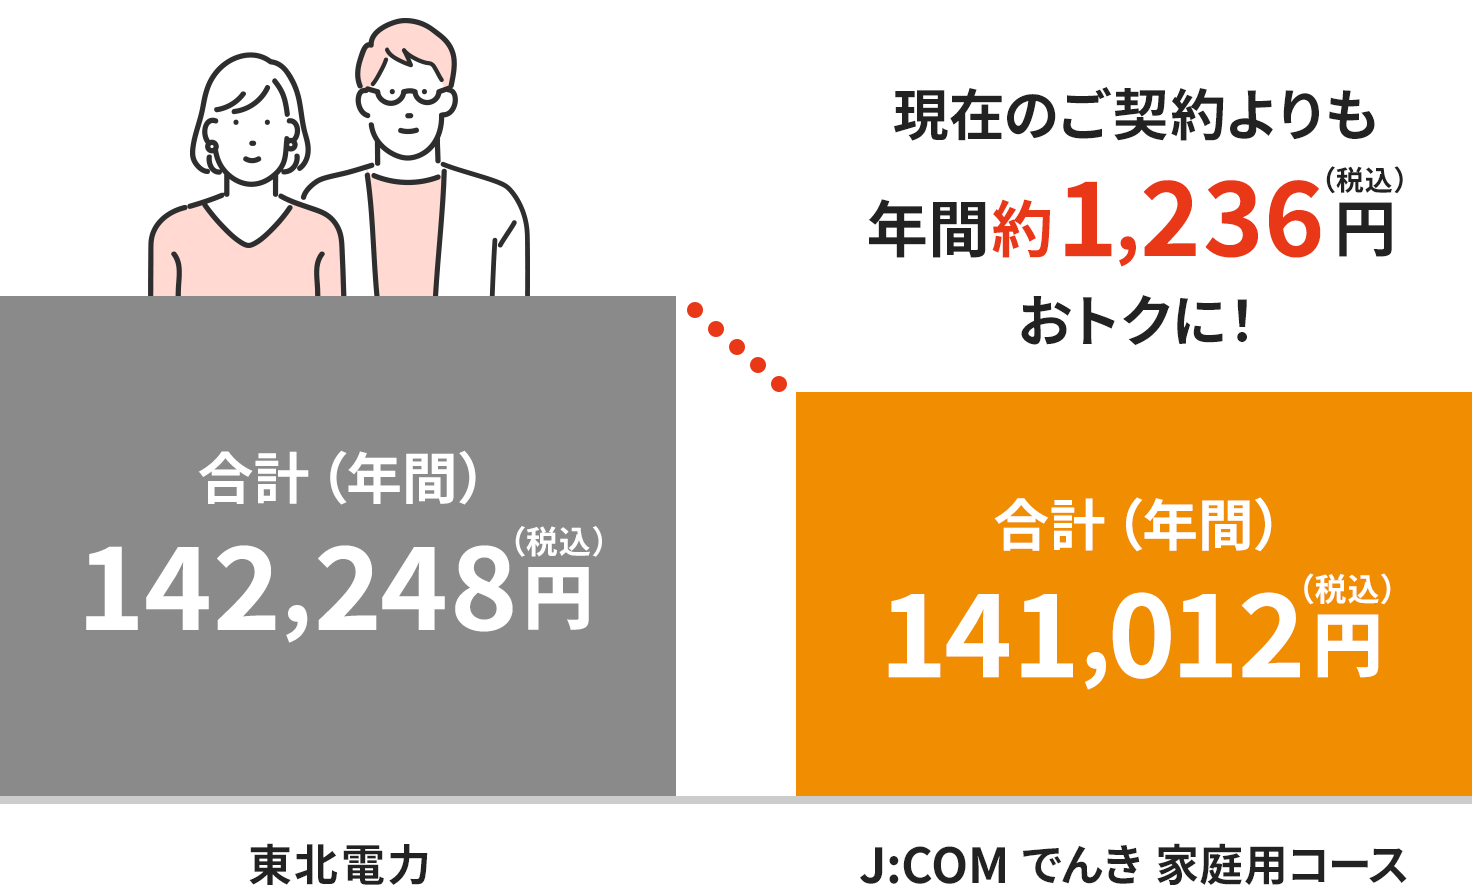 Illustration of discounts on electricity bills when you switch to J:COM DENRYOKU